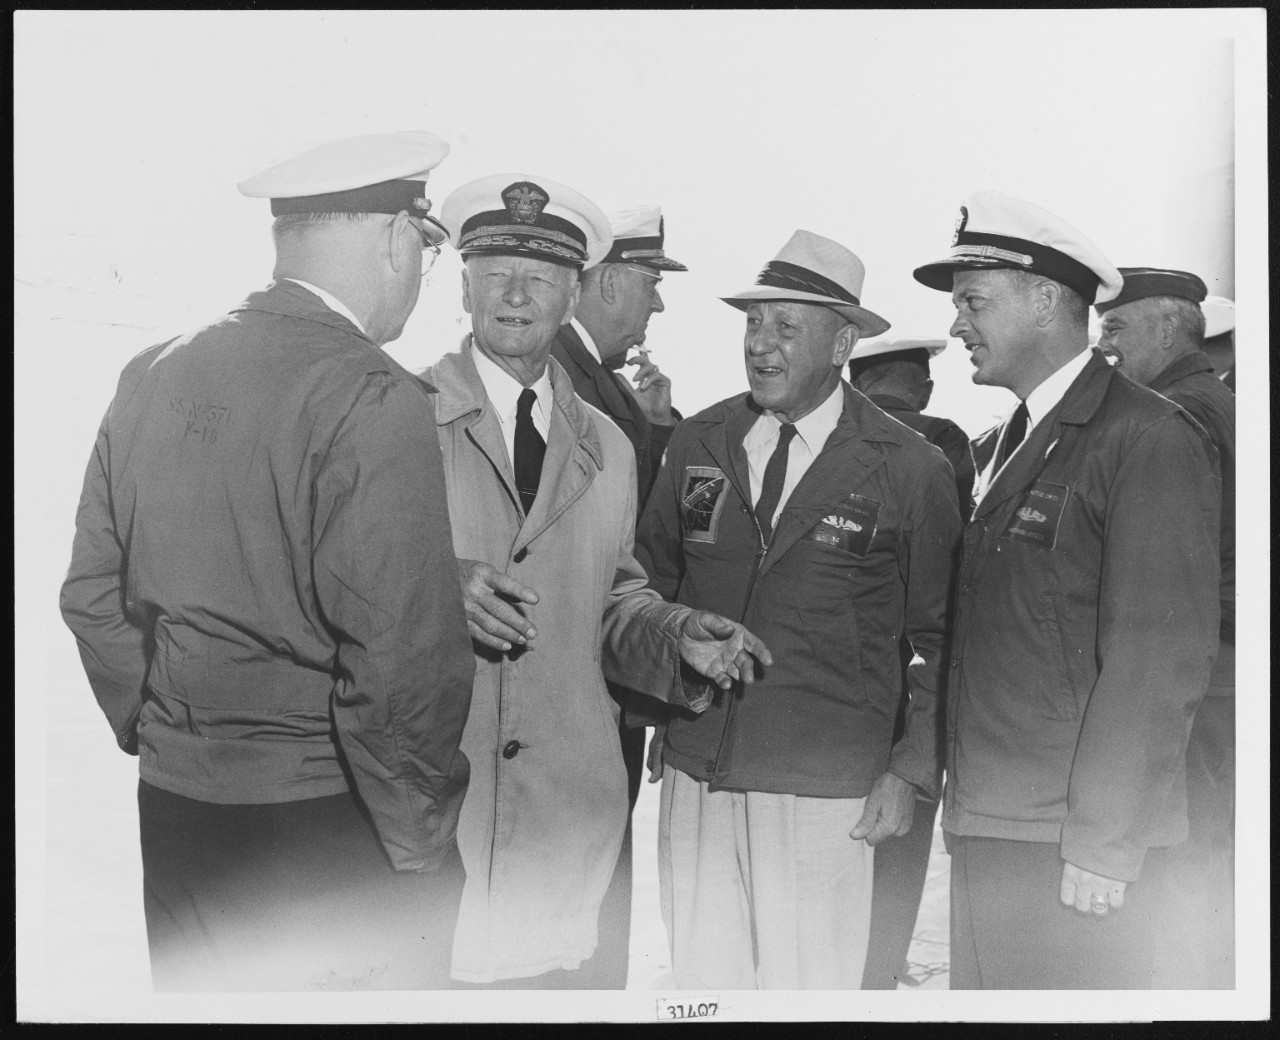 Fleet Admiral Nimitz, USN, and Other Officers Converse Aboard USS NAUTILUS (SSN-571)